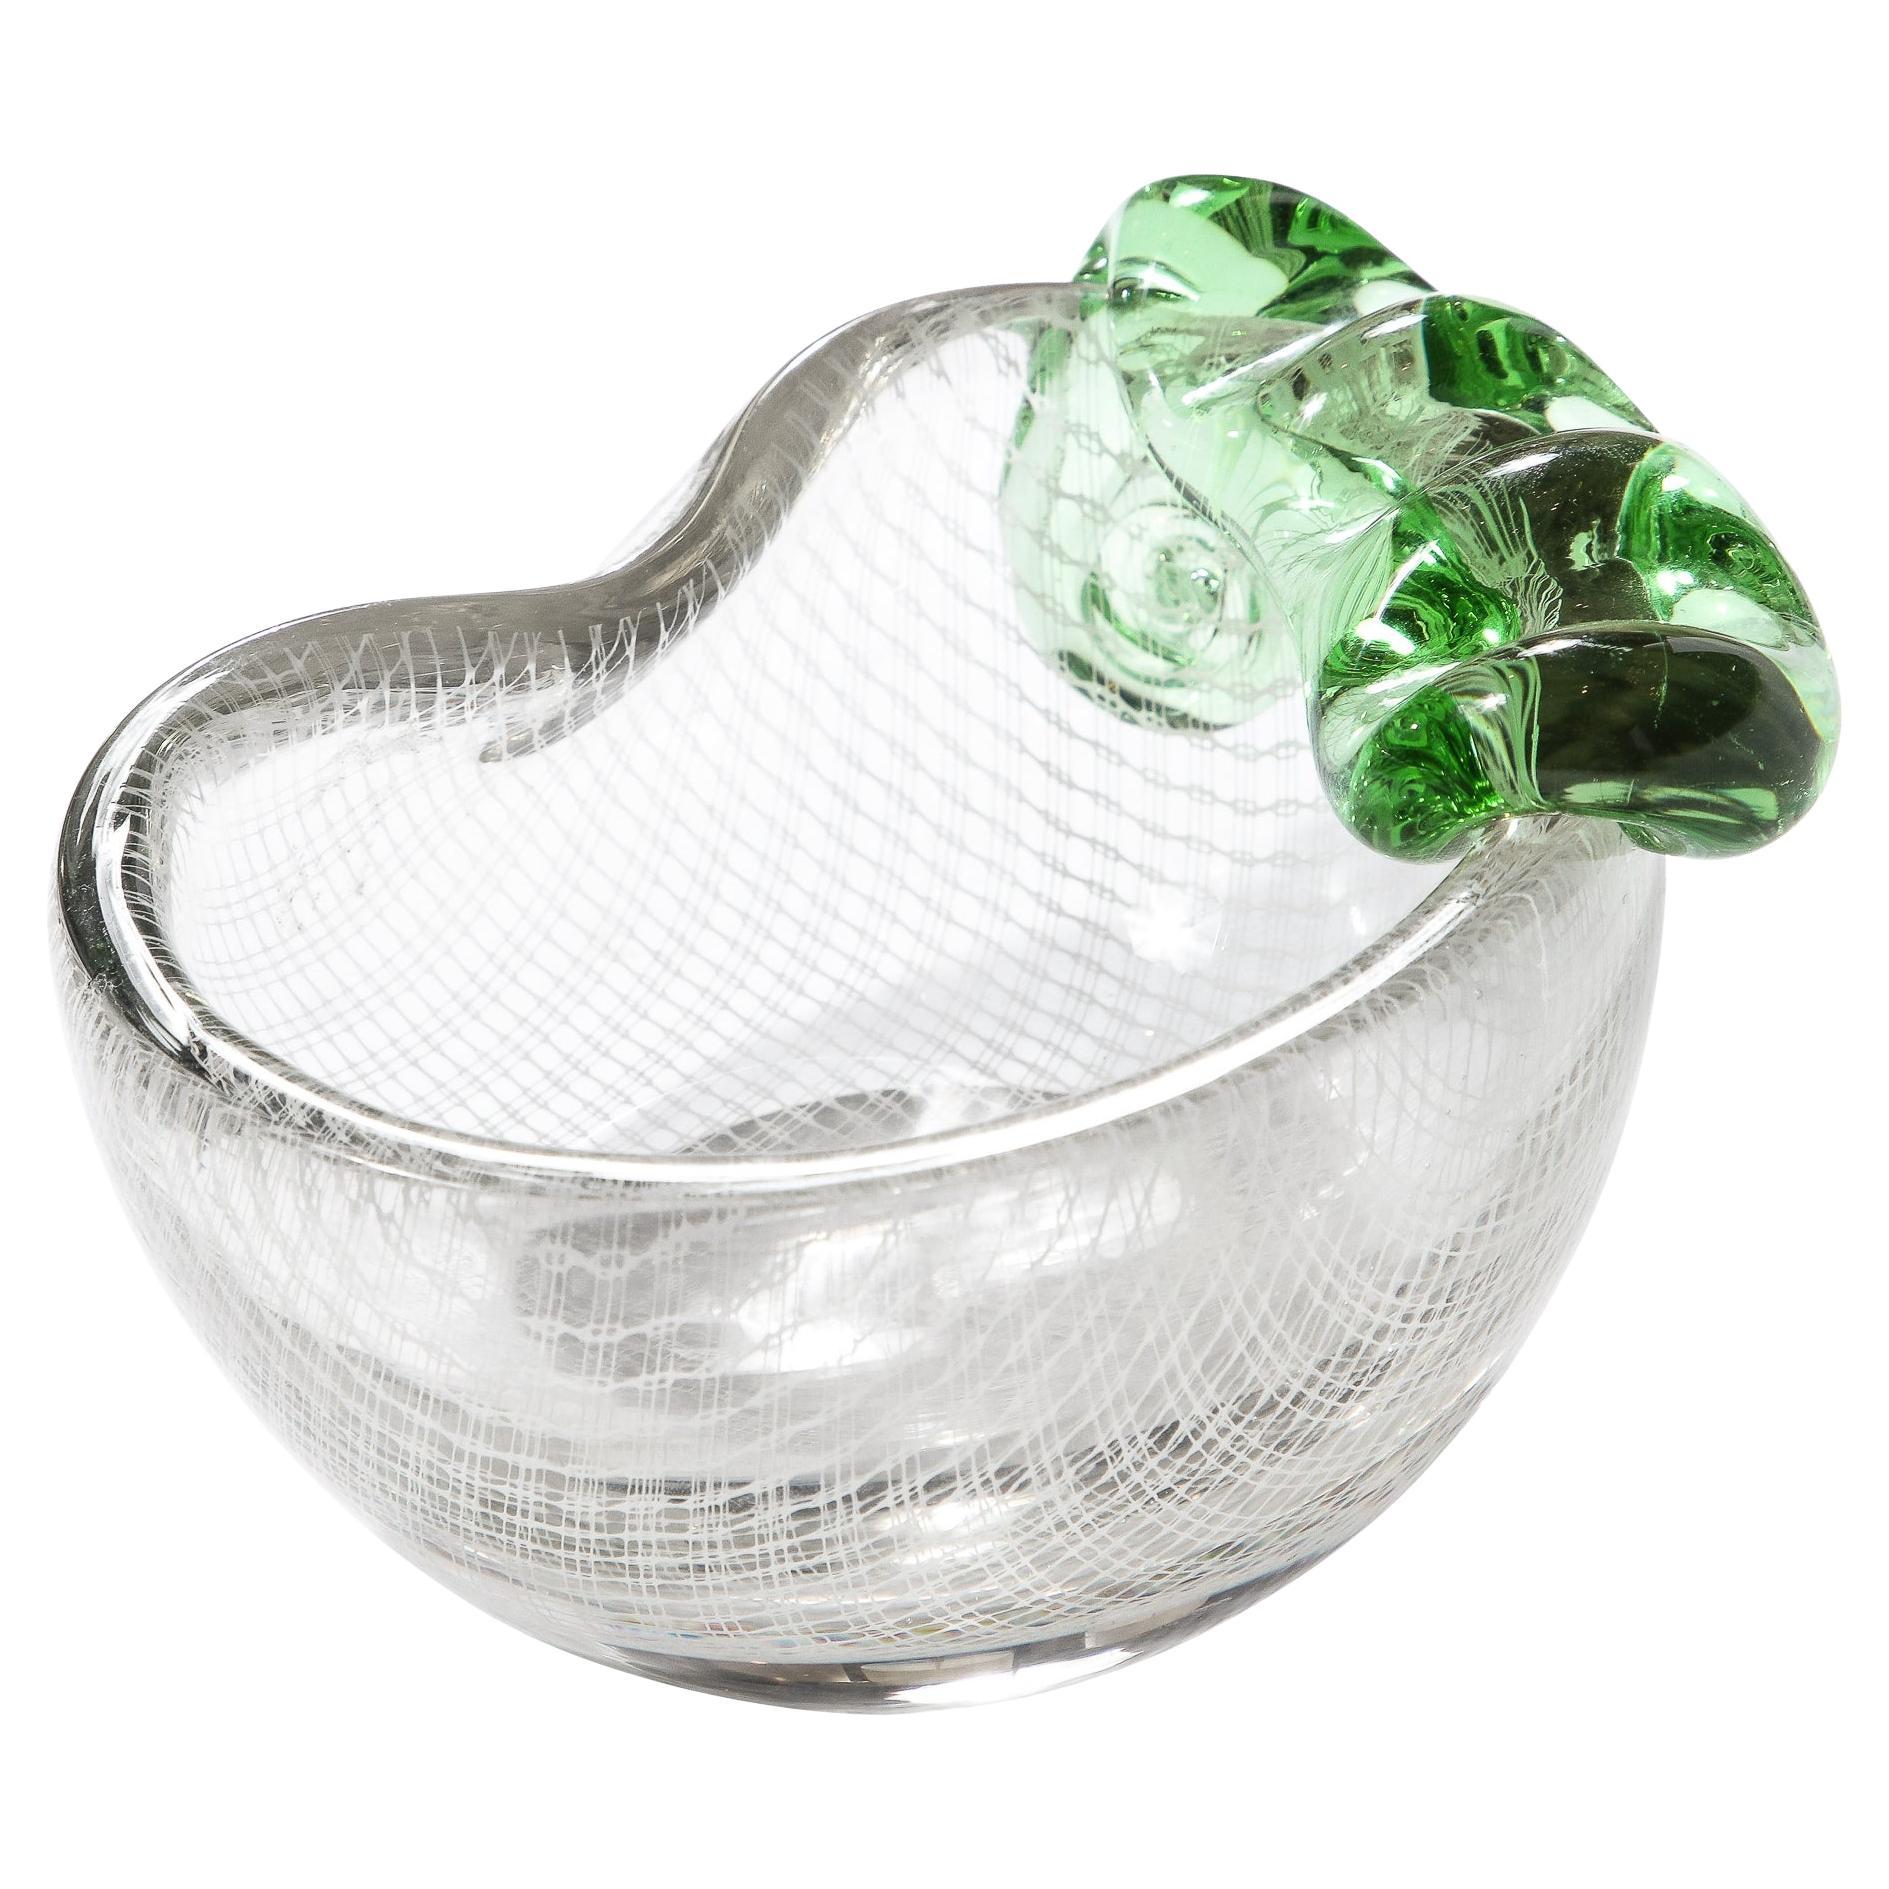 Murano Archimede Seguso Glass Bowl with Filigree Sculptural Detailing